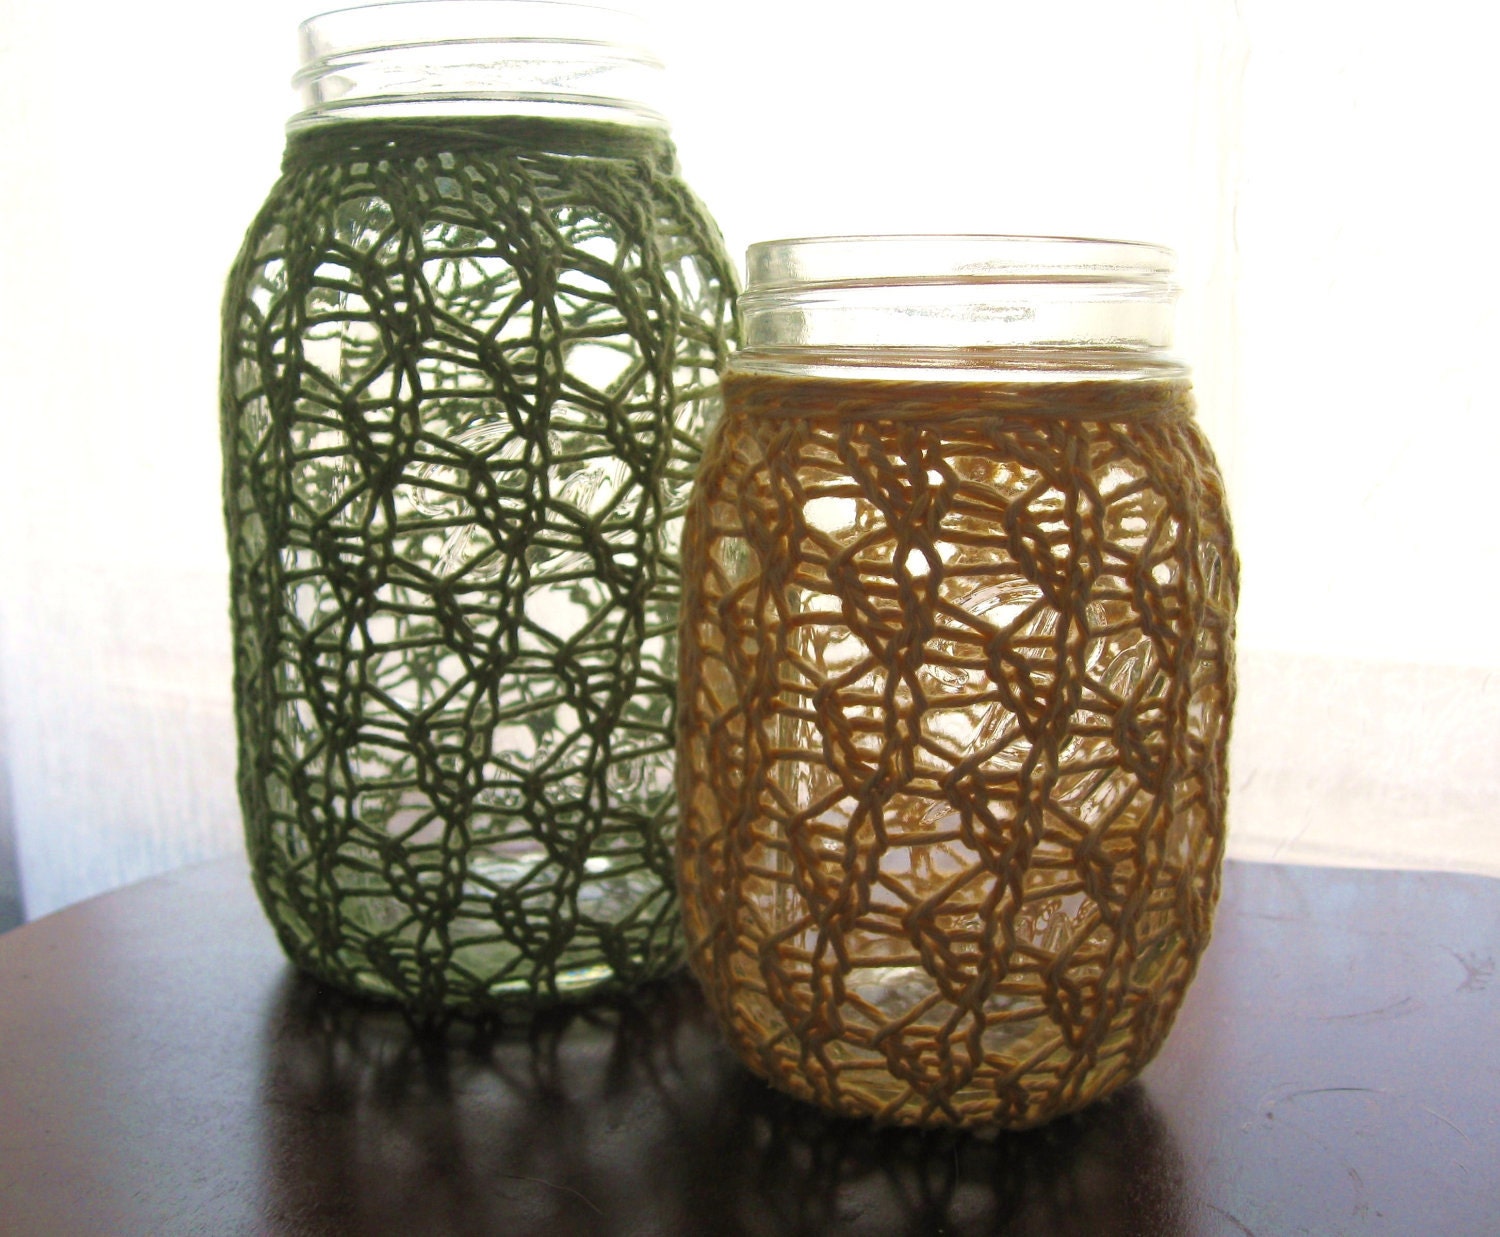 Mason Jar Wedding Centerpieces Lace Knit Recycled Cotton Set of 2 